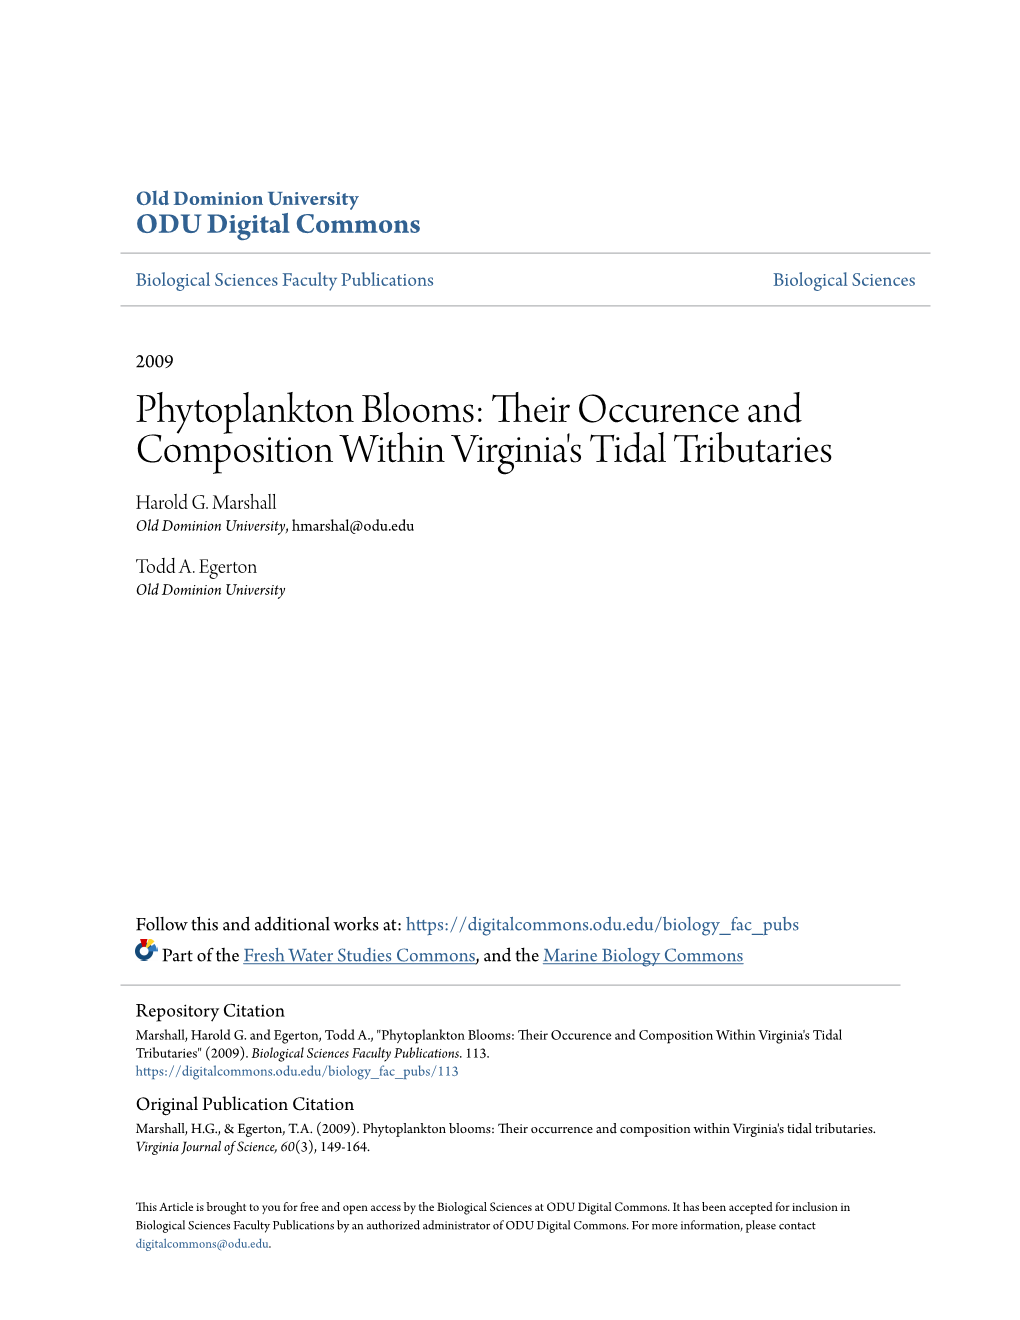 Phytoplankton Blooms: Their Cco Urence and Composition Within Virginia's Tidal Tributaries Harold G